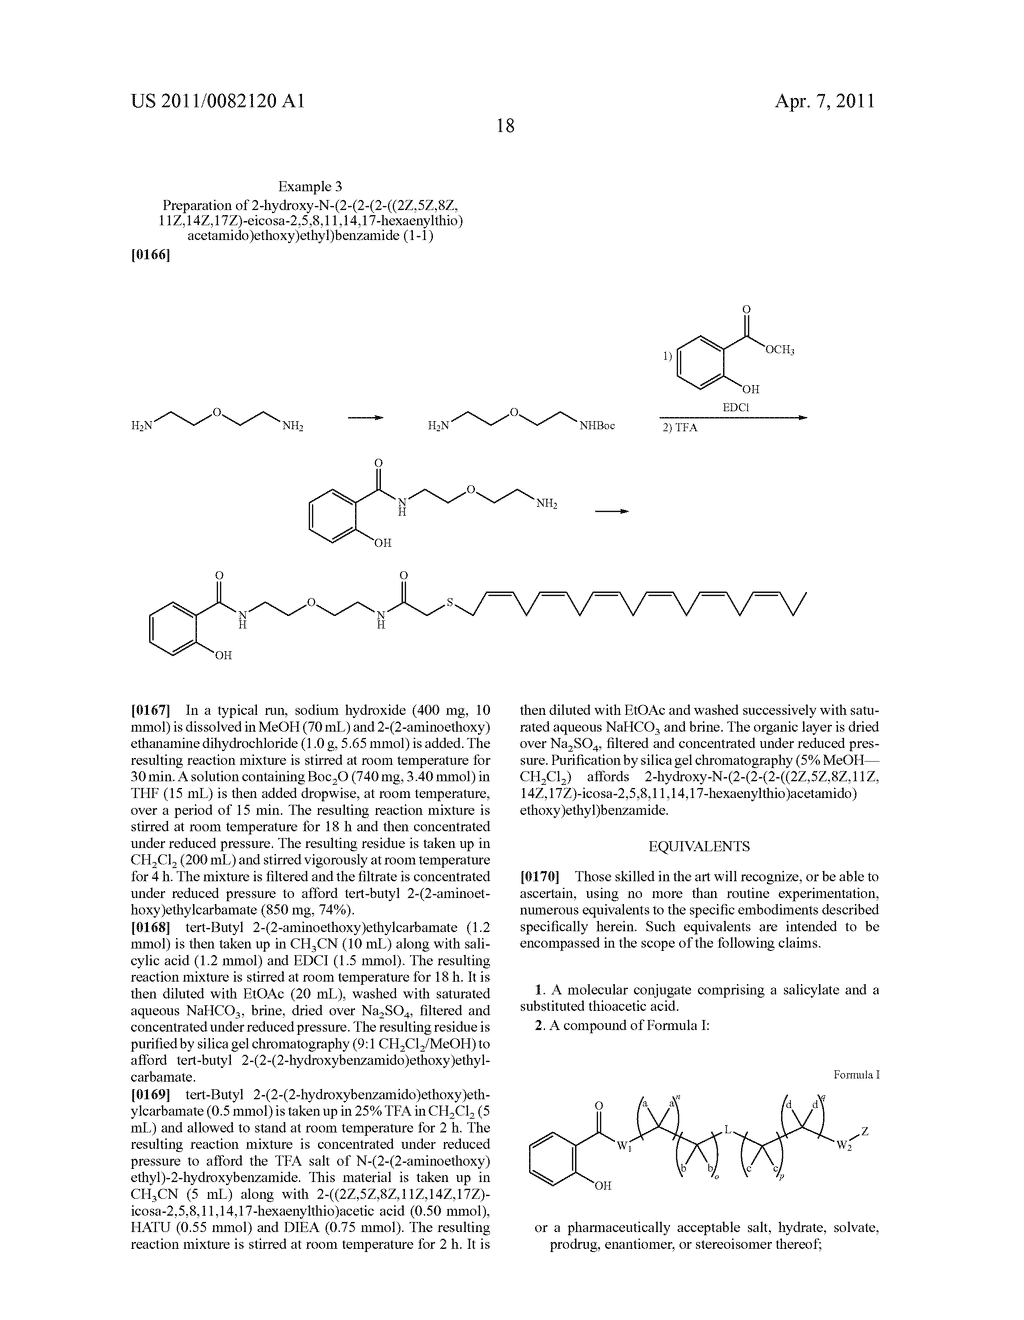 SUBSTITUTED THIOACETIC ACID SALICYLATE DERIVATIVES AND THEIR USES - diagram, schematic, and image 19